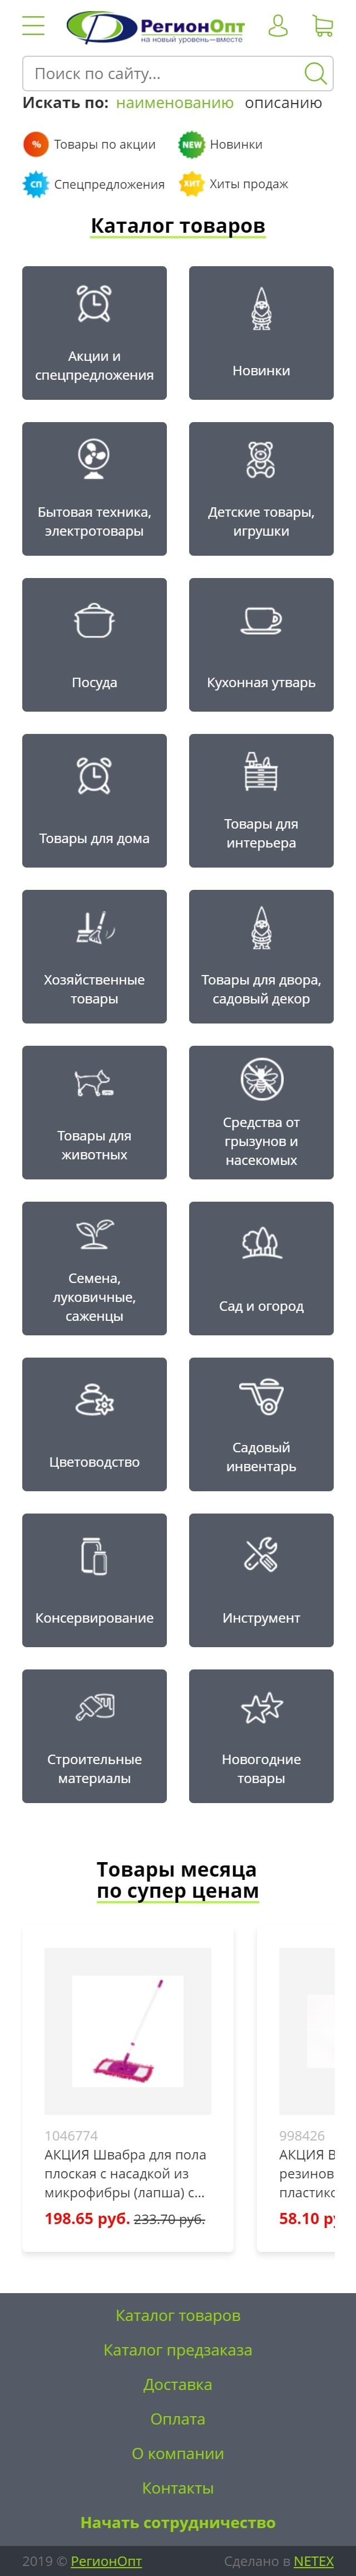 image of the mobile version of the site «Regionopt»